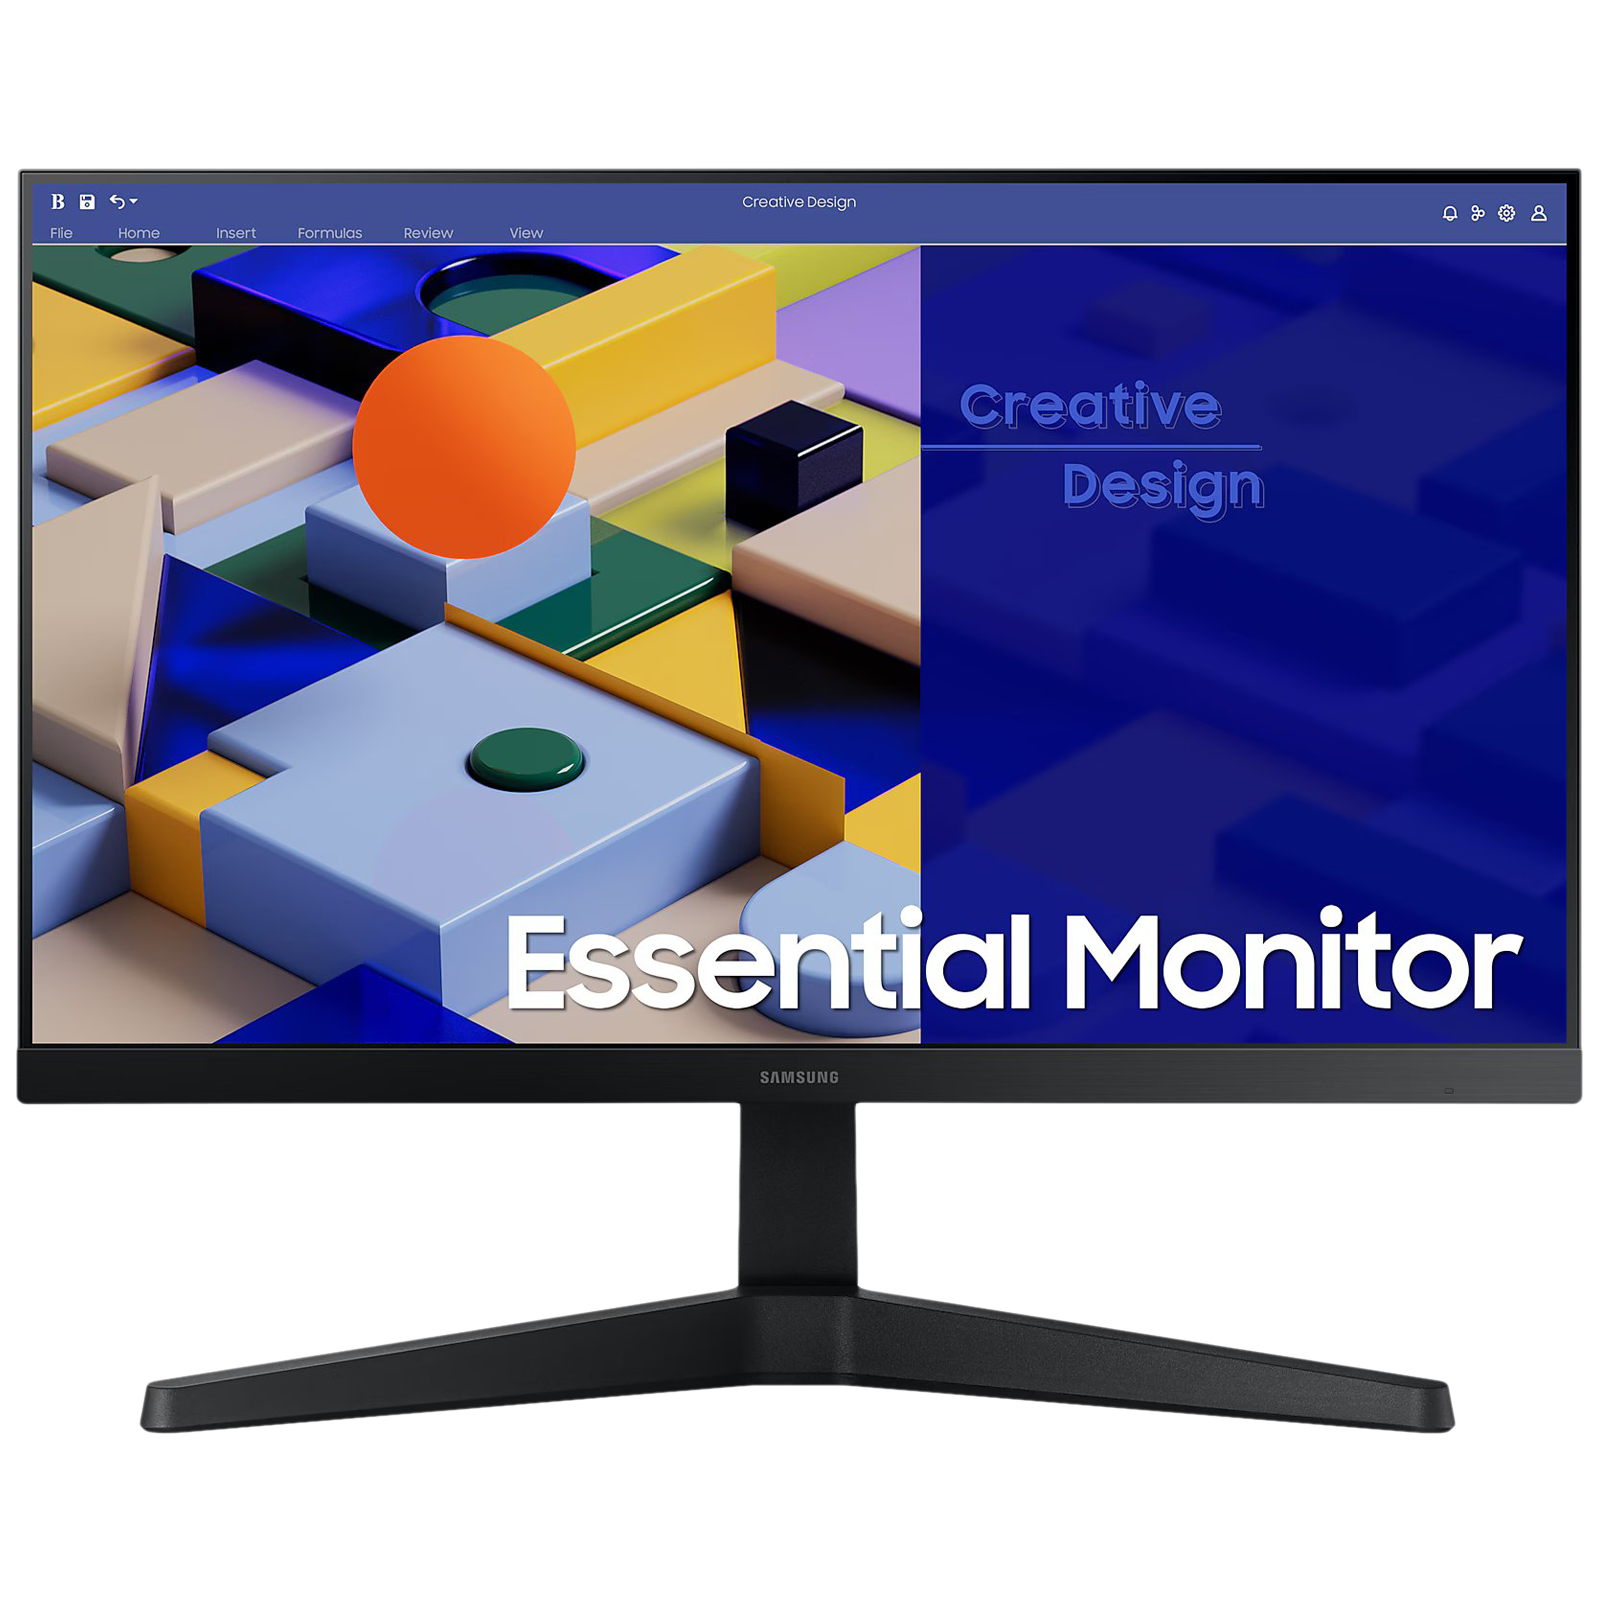 SAMSUNG Essential 55.88 cm (22 inch) Full HD IPS Panel 3 Side Narrow Bezel Height Adjustable Gaming Monitor with AMD Free Sync